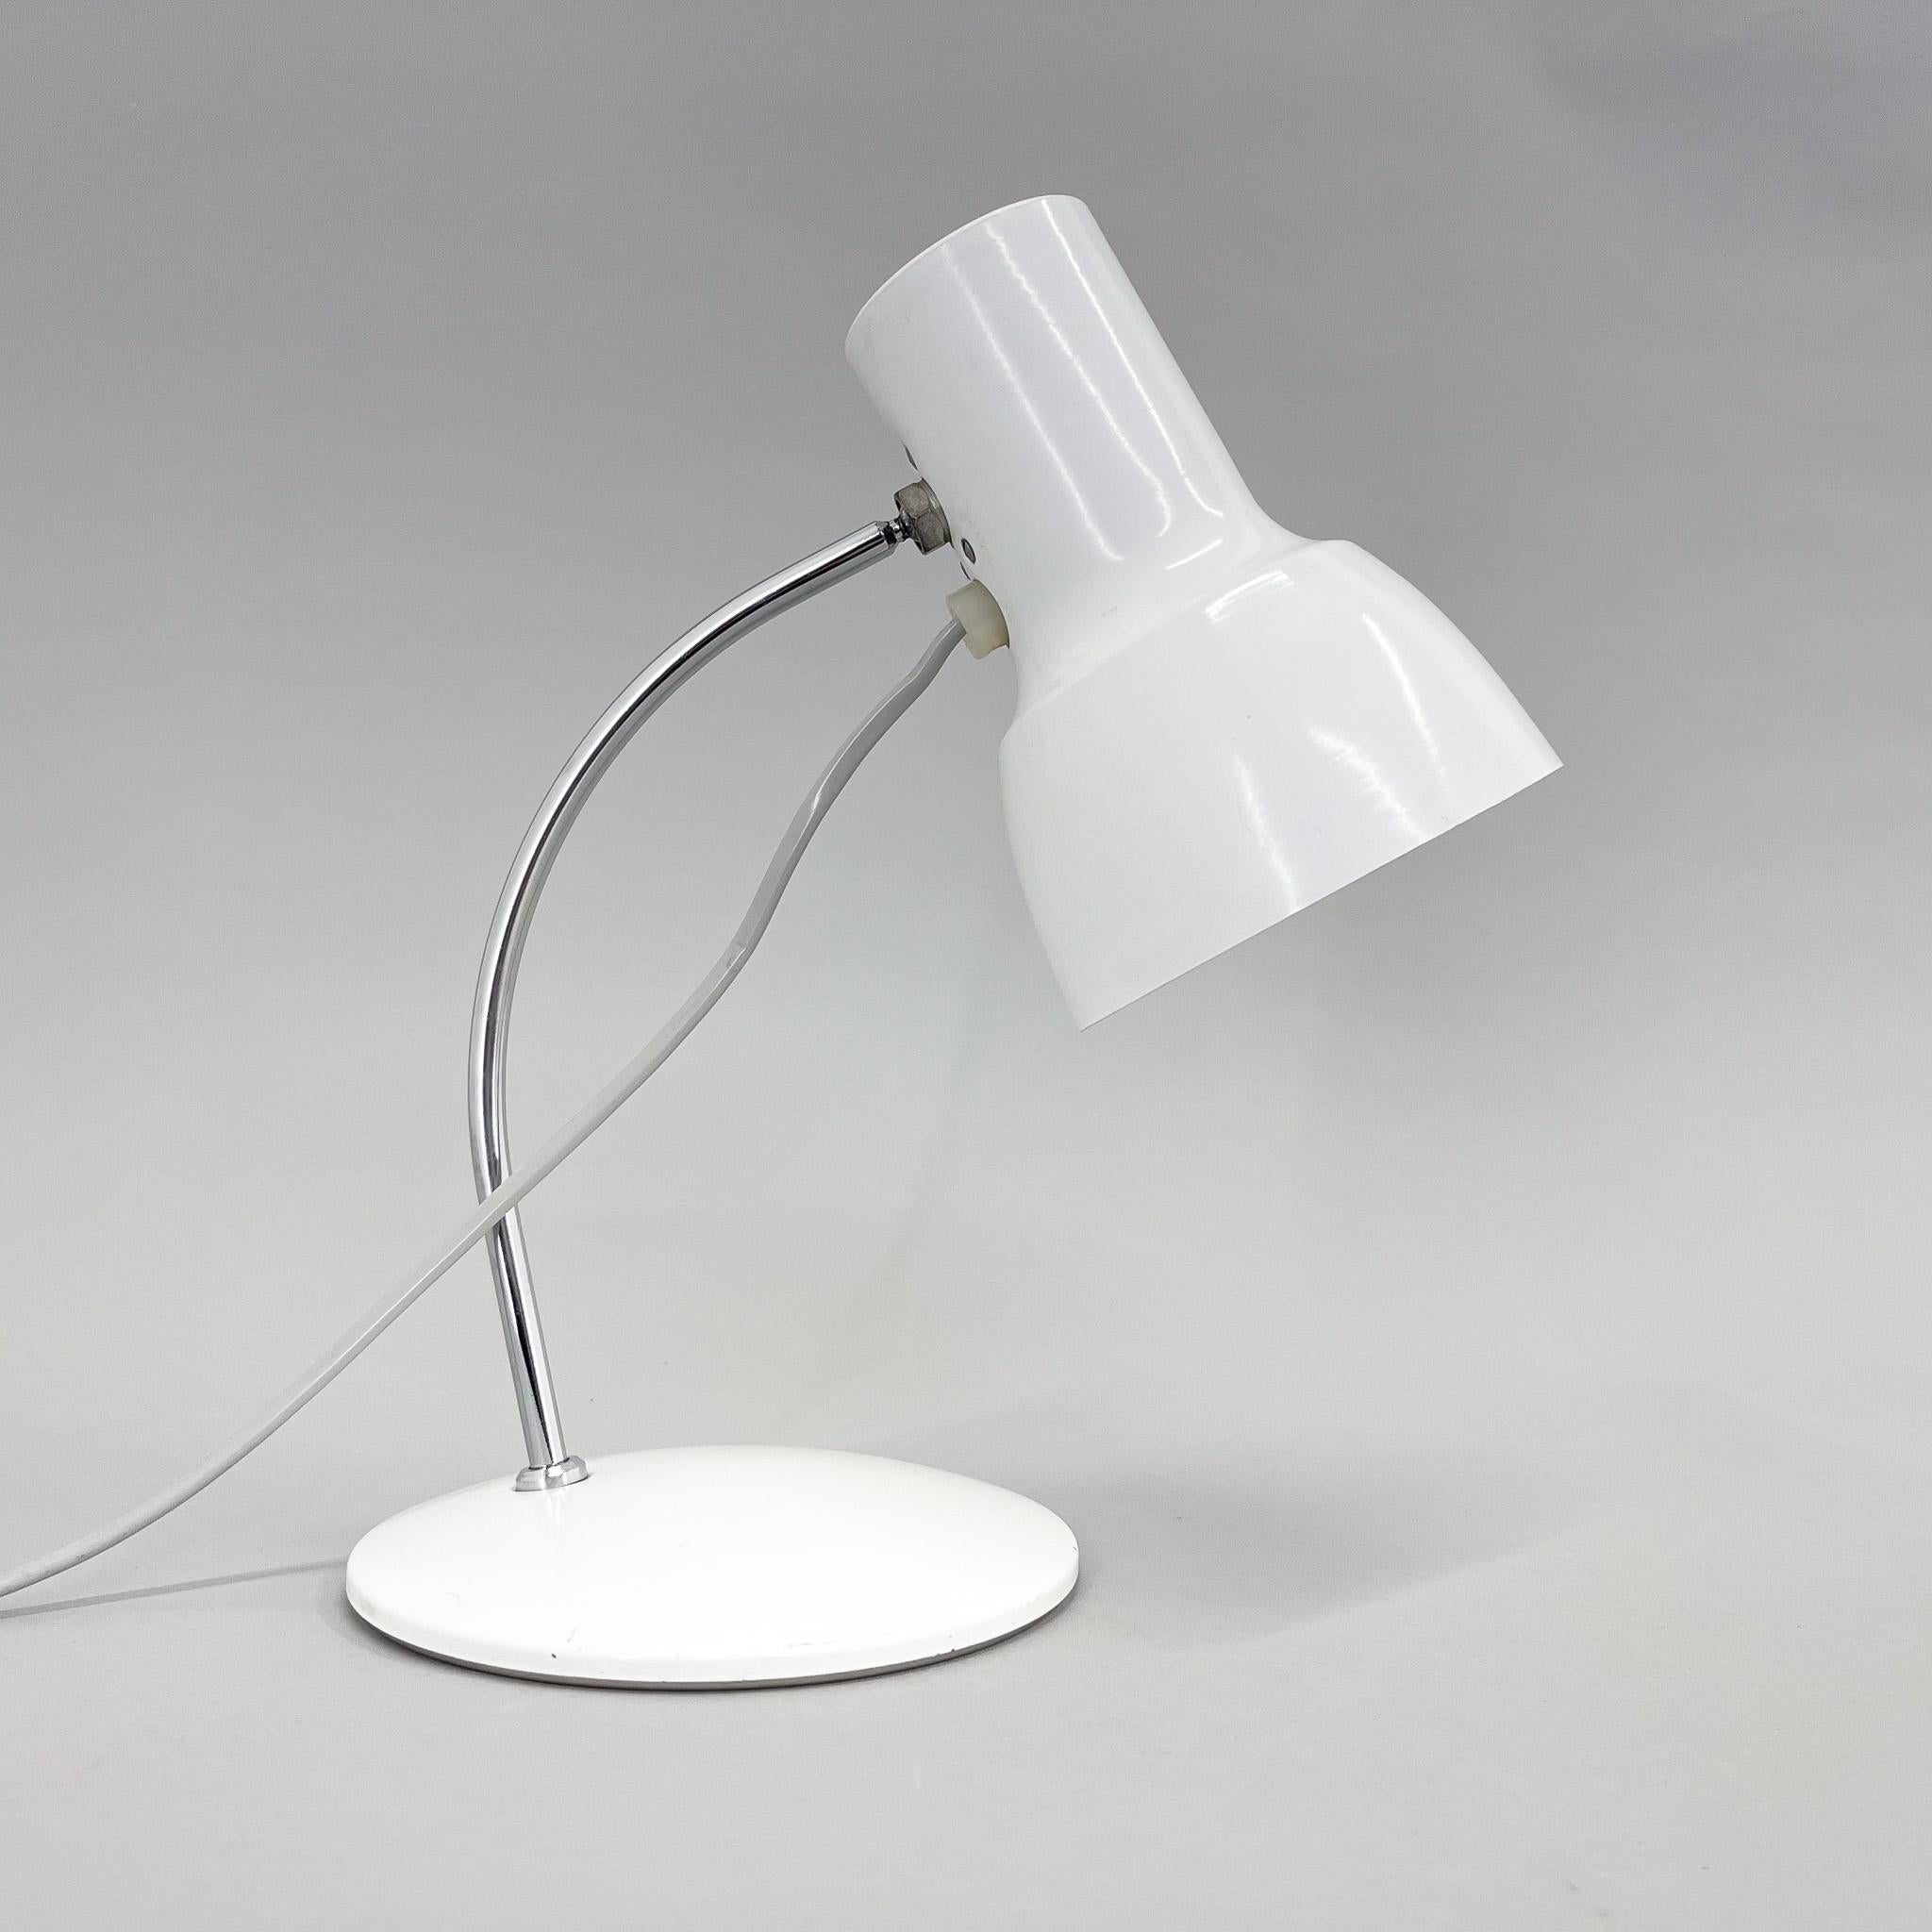 Vintage small white table lamp with adjustable lamp shade. Bulbs: 1x 1 E14. US US plug adapter included.